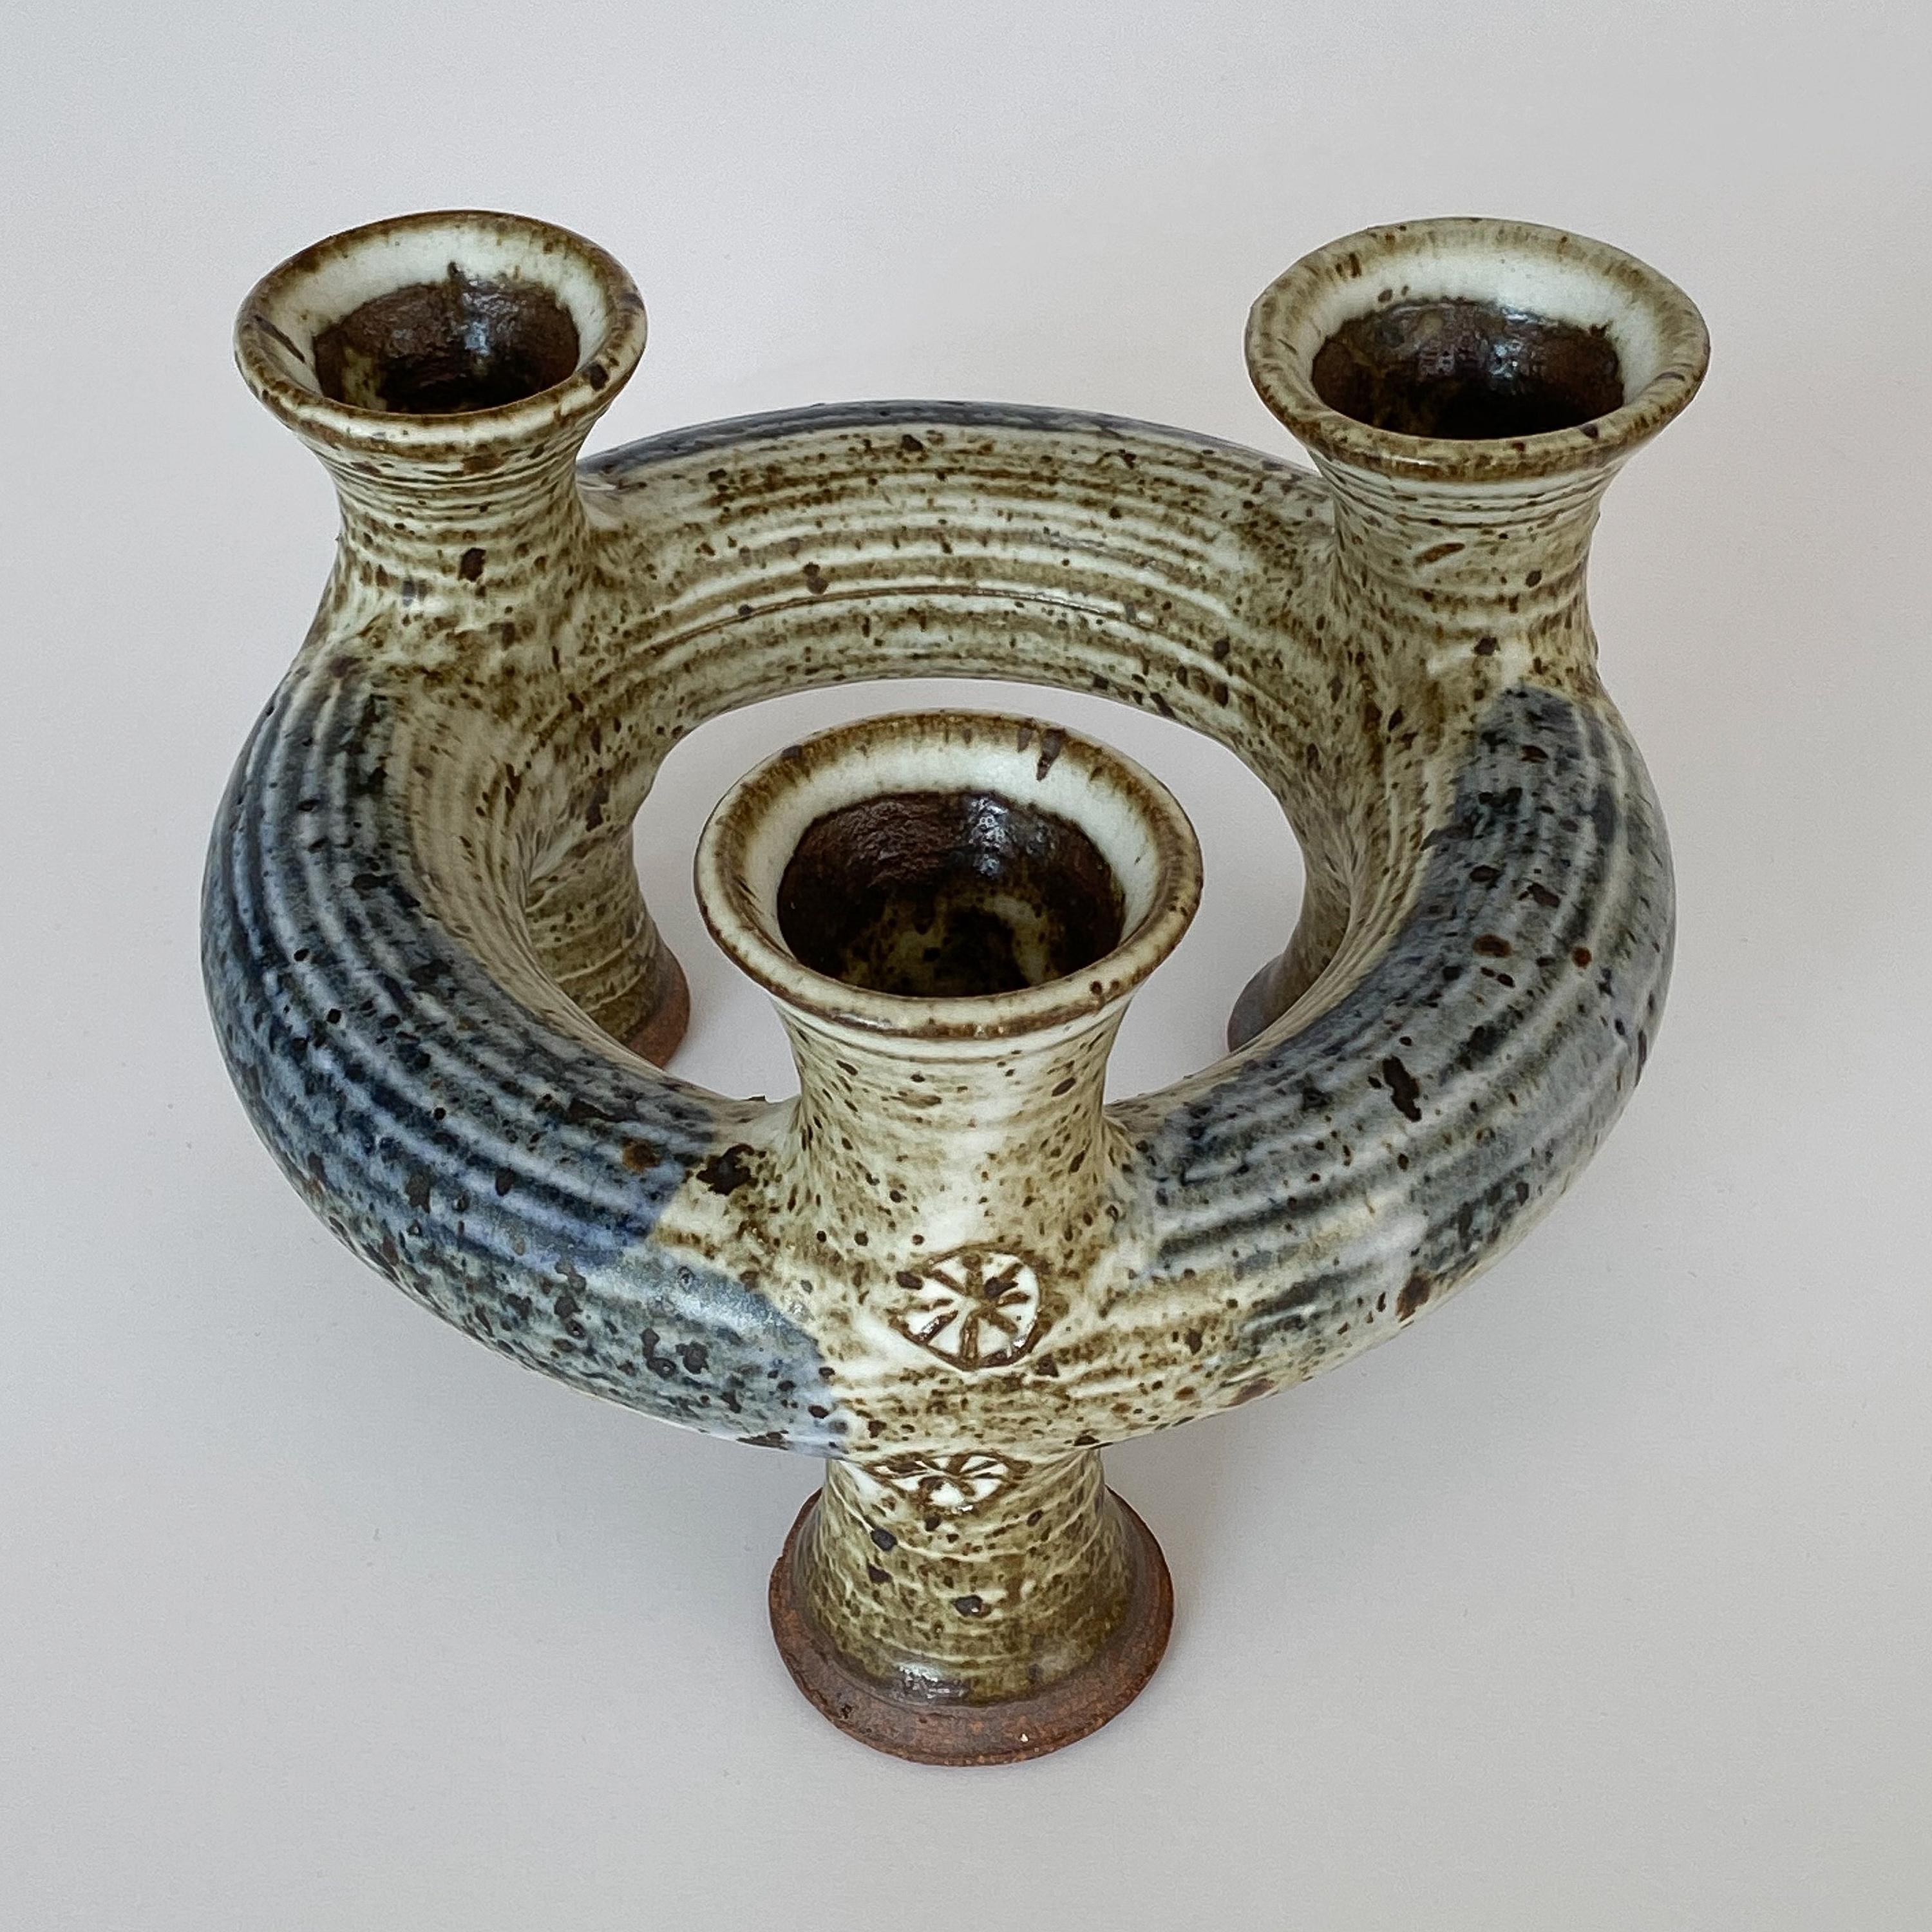 Unique and uncommon Studio Pottery candleholder by Vivika & Otto Heino, circa 1960s. Ring shaped form with trumpet shaped feet and candle cups. Holds three candles. Glazed stoneware pottery in blue, cream and light brown. Signed to underside of the